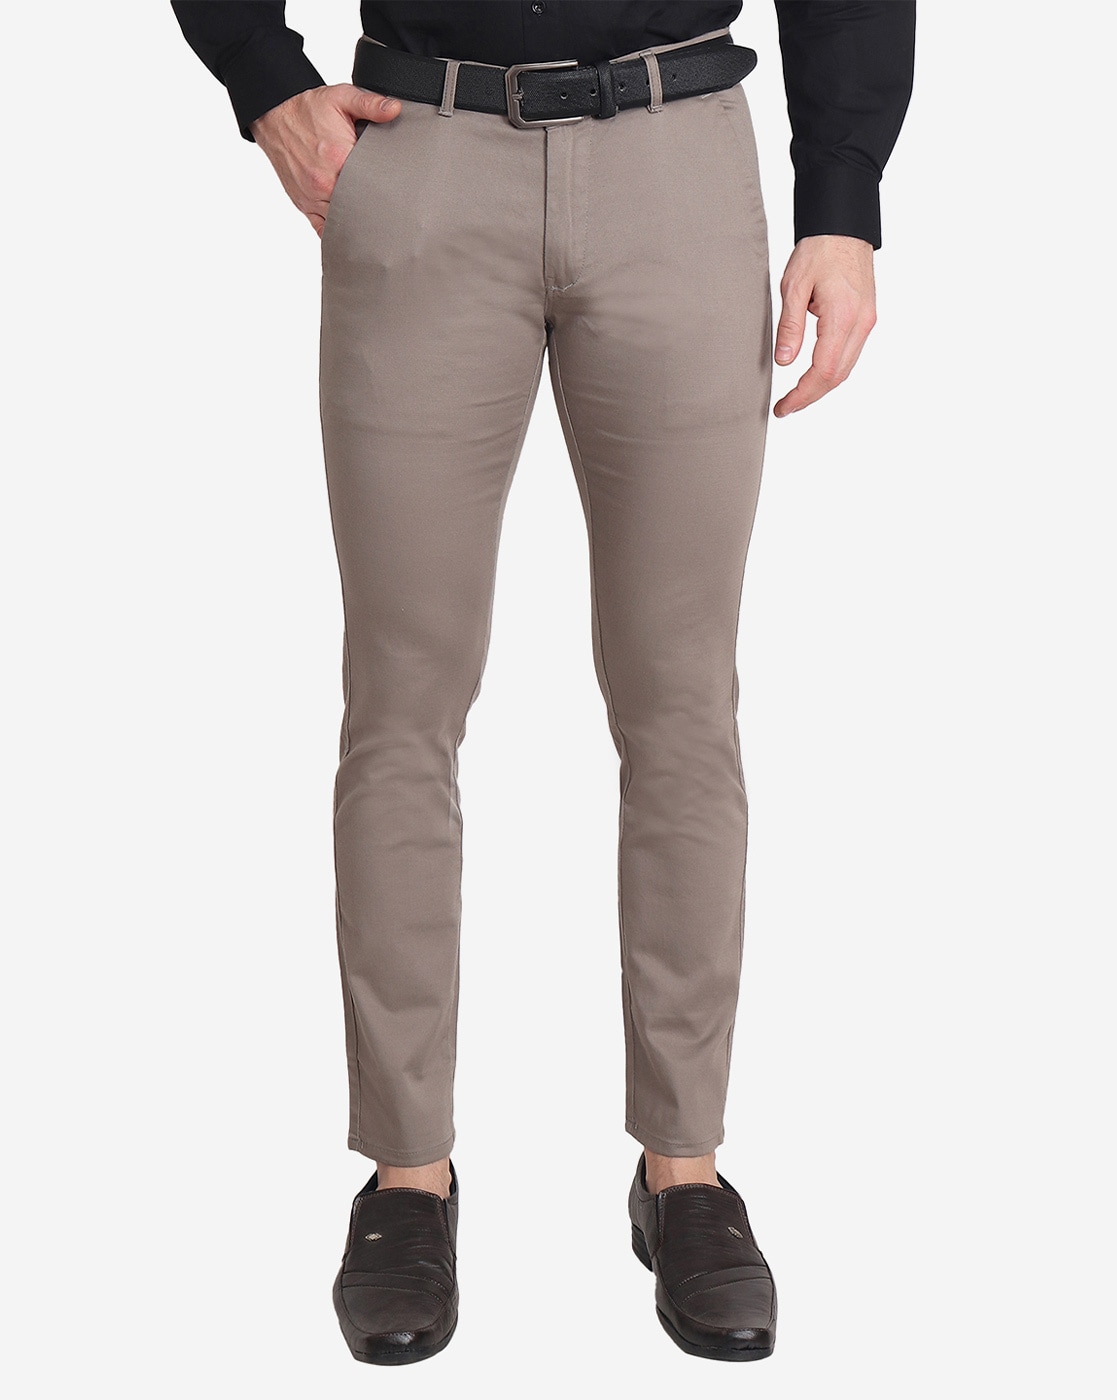 Buy online Grey Polyester Chinos Casual Trousers from Bottom Wear for Men  by Vmart for 639 at 9 off  2023 Limeroadcom